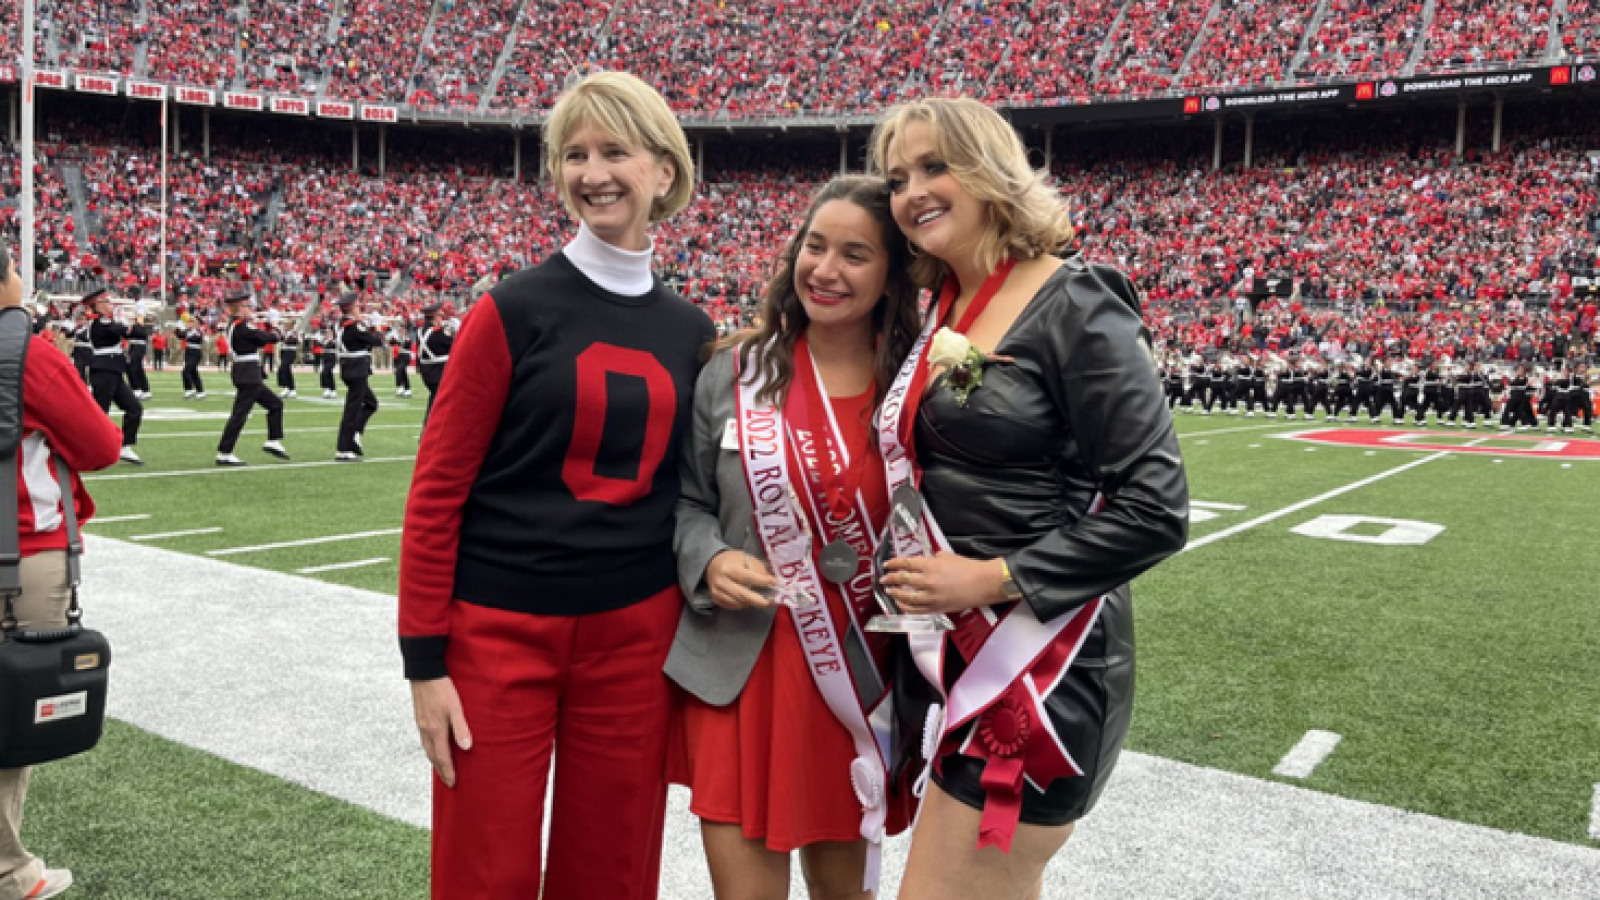 WGSS minor and Homecoming Royalty Kelsey Lowman alongside fellow Homecoming Royalty Shayna Kling and Ohio State President Kristina Johnson